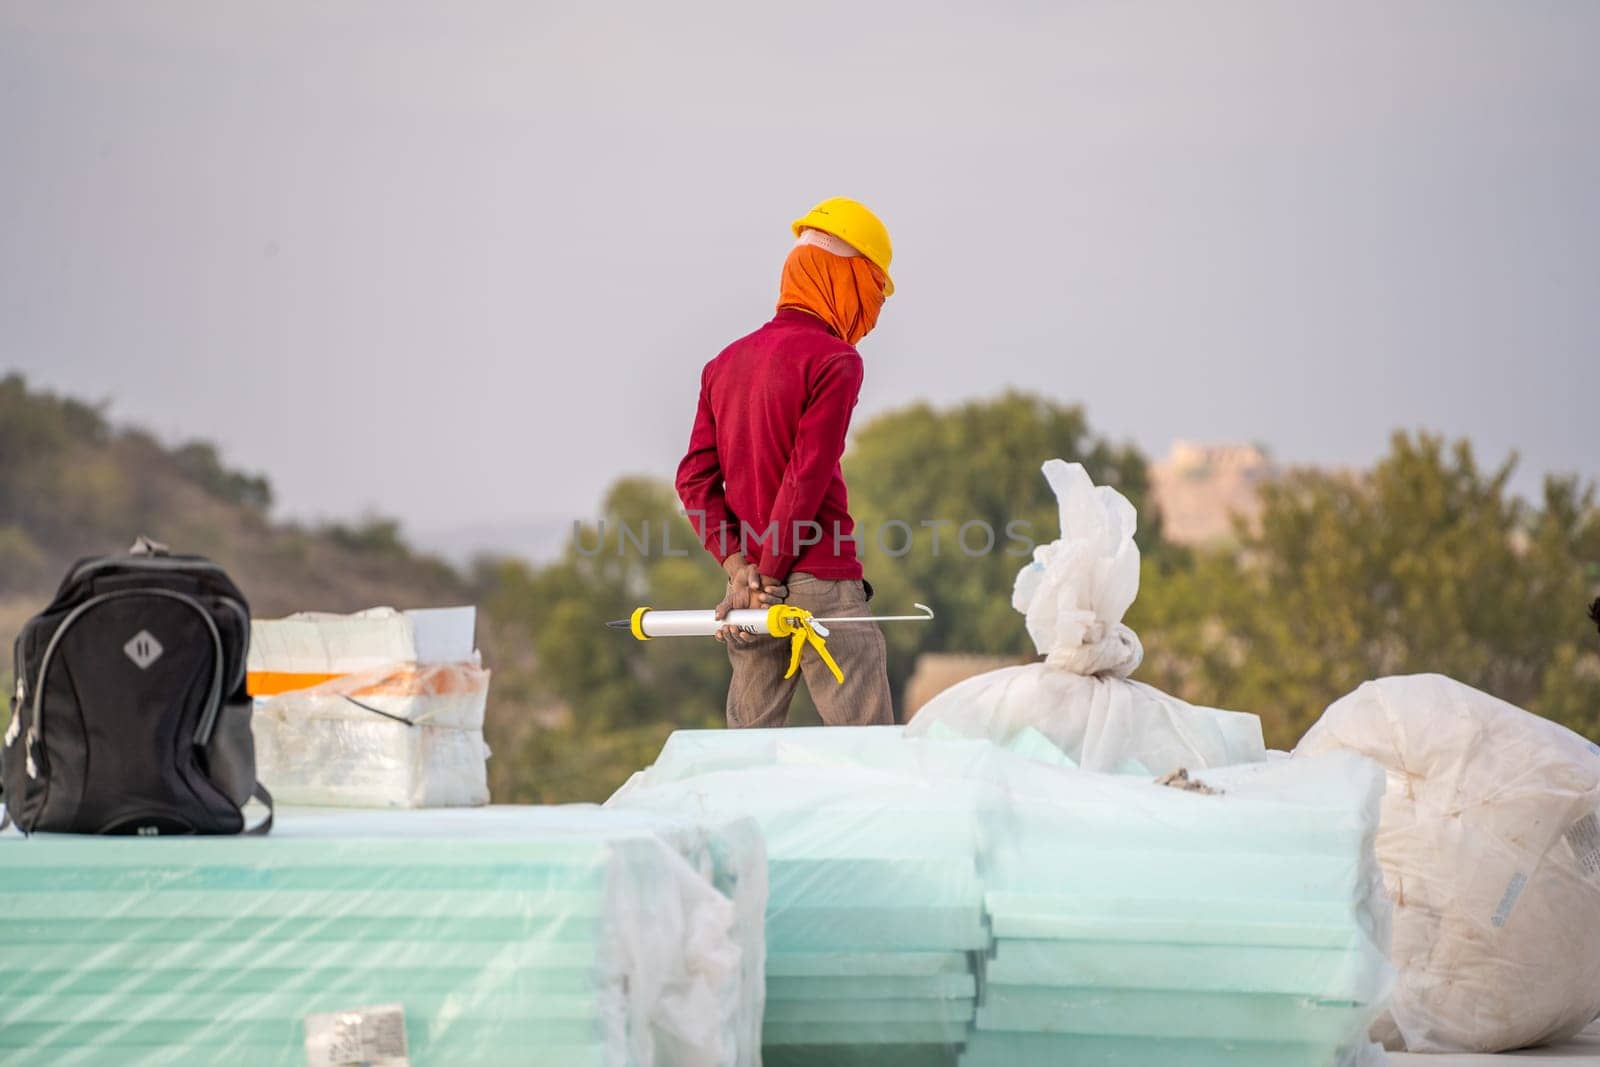 labourer with face covered to protect from the heat looking down showing the real estate industry in India